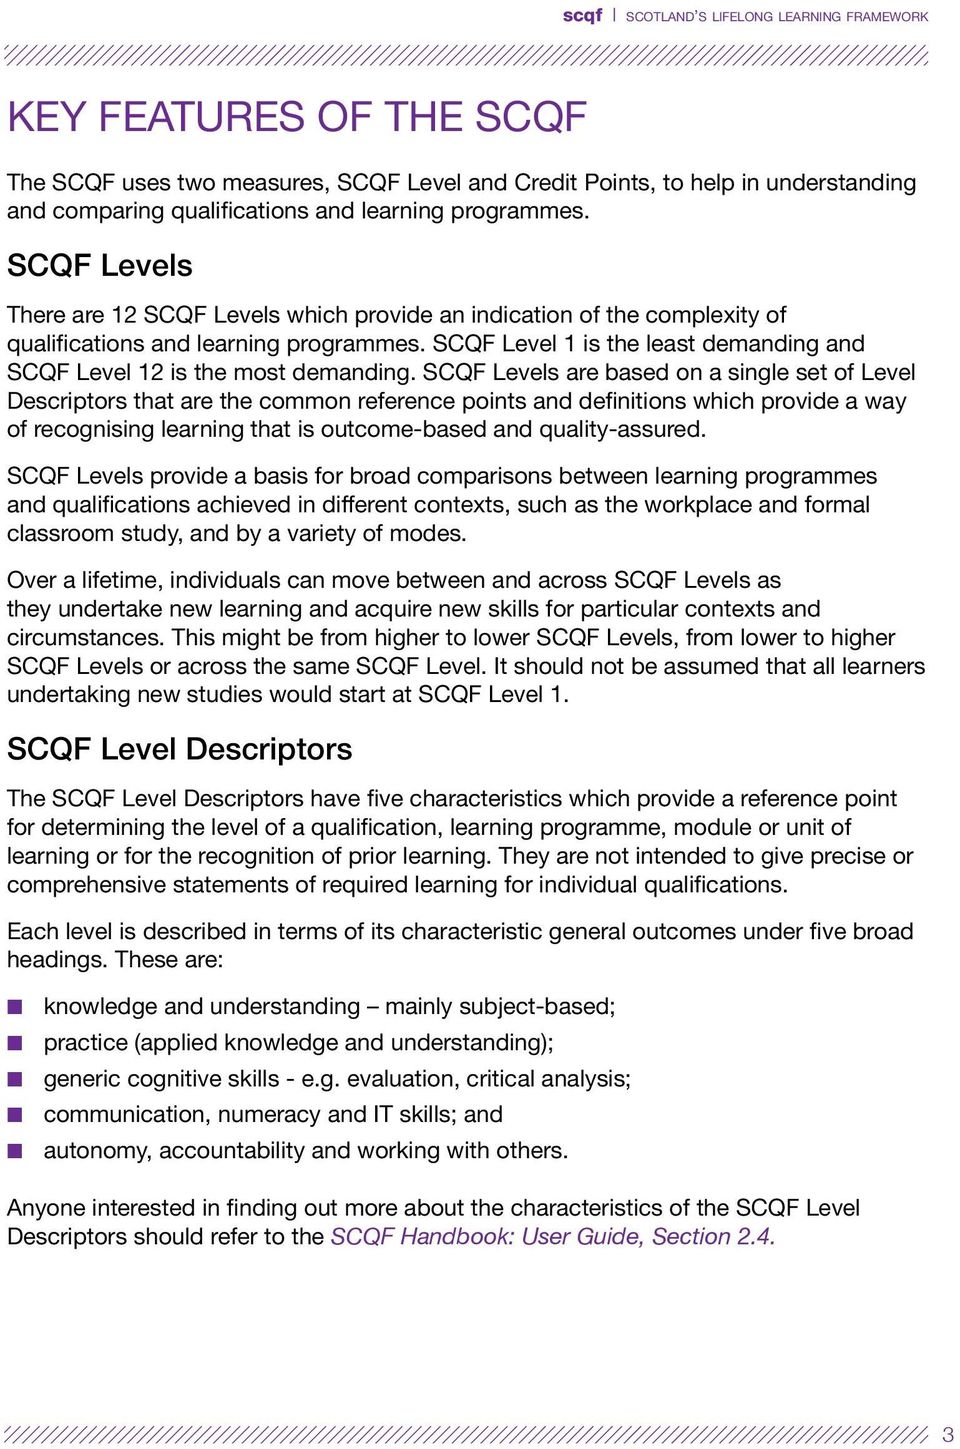 SCQF Level 1 is the least demanding and SCQF Level 12 is the most demanding.